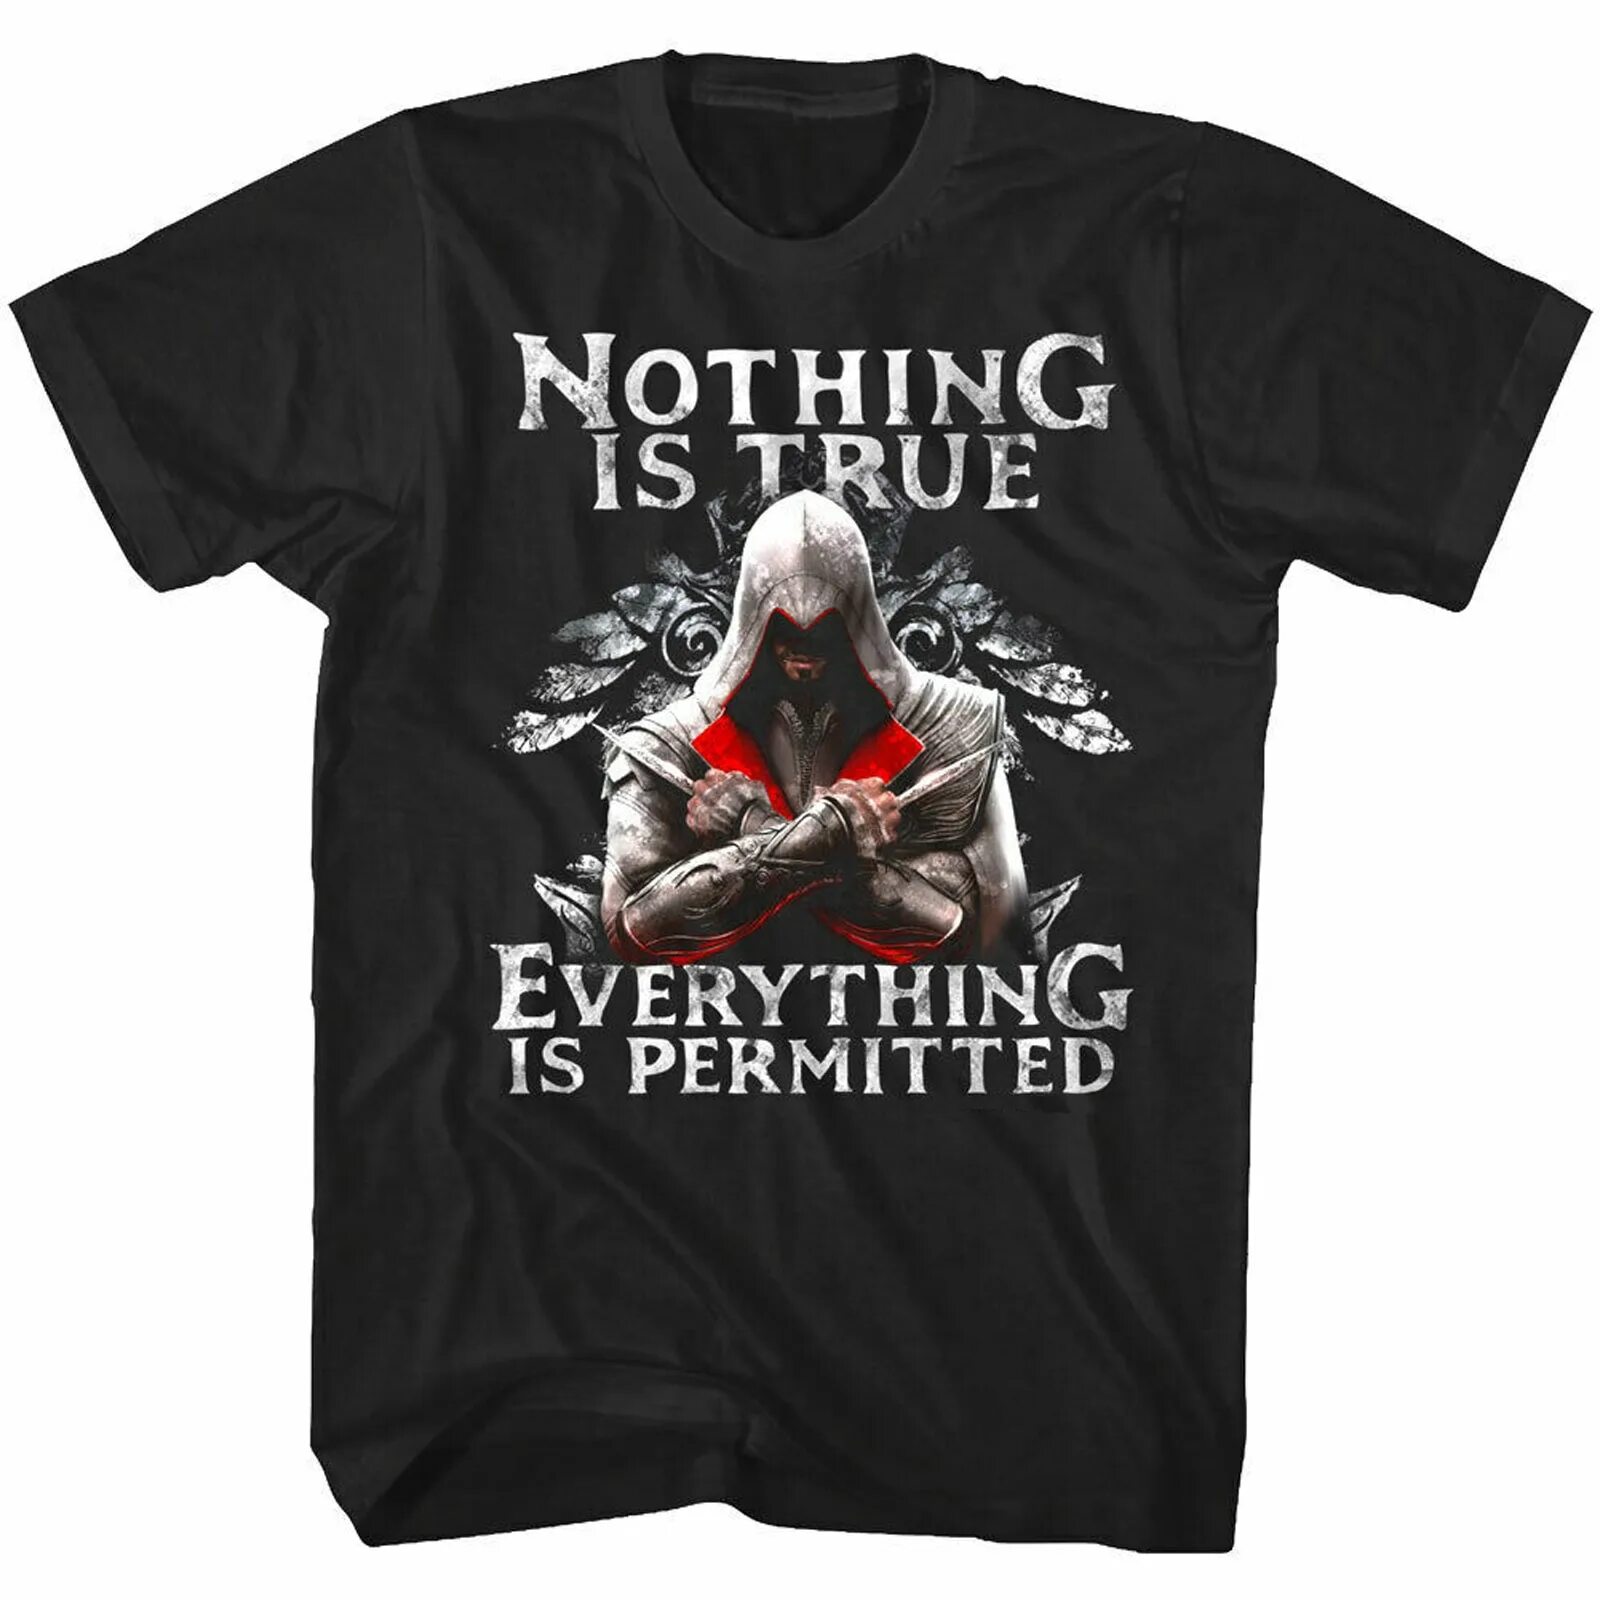 Nothing is true everything is permitted. Футболка everything is. Nothing true everything permitted. Футболка nothing everything. True everything